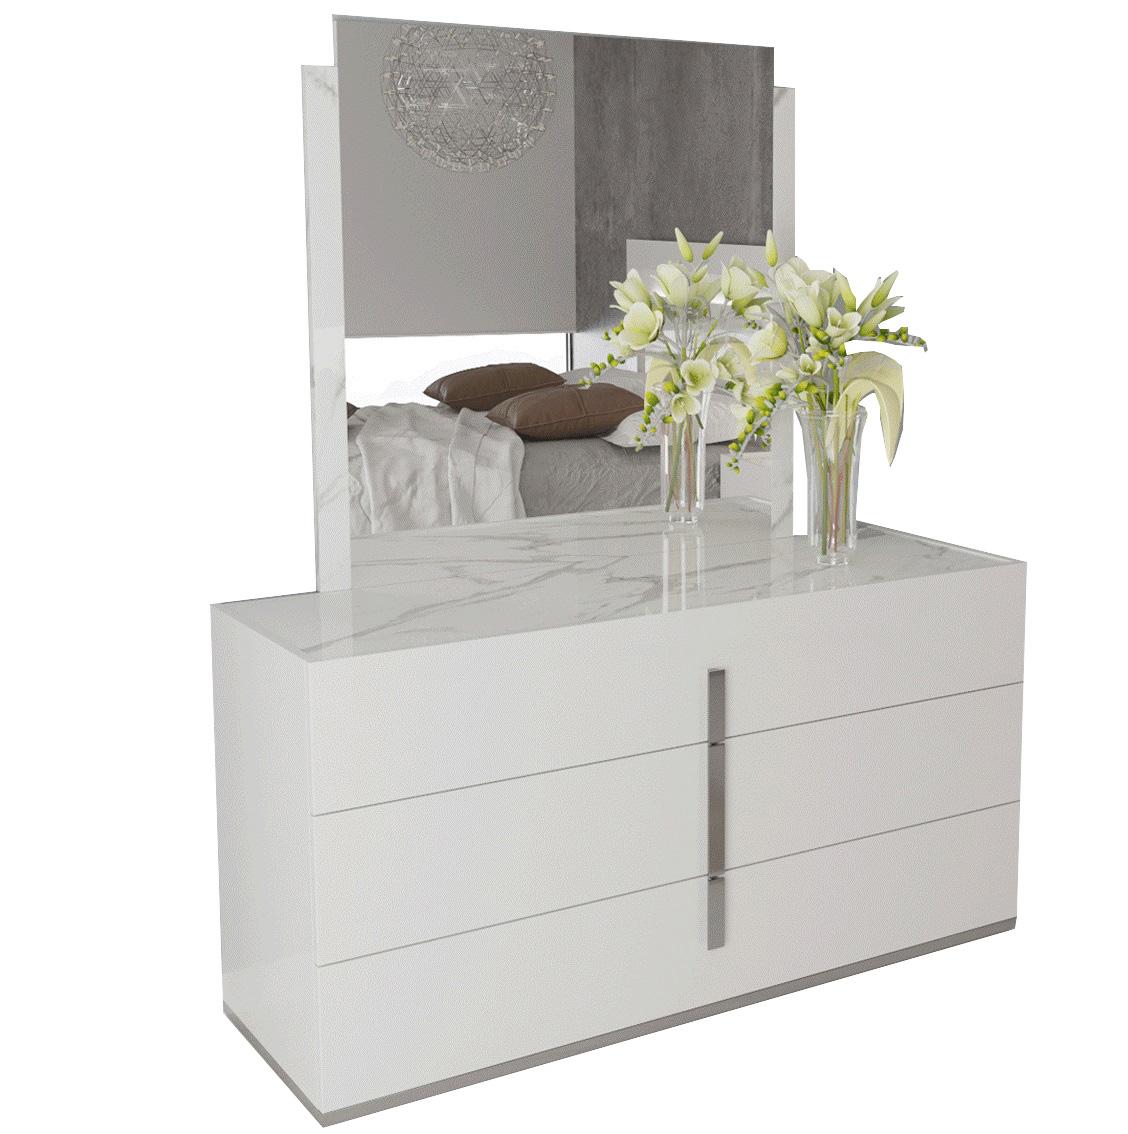 

    
Glossy White Double Dresser CARRARA ESF Modern Contemporary MADE IN ITALY
